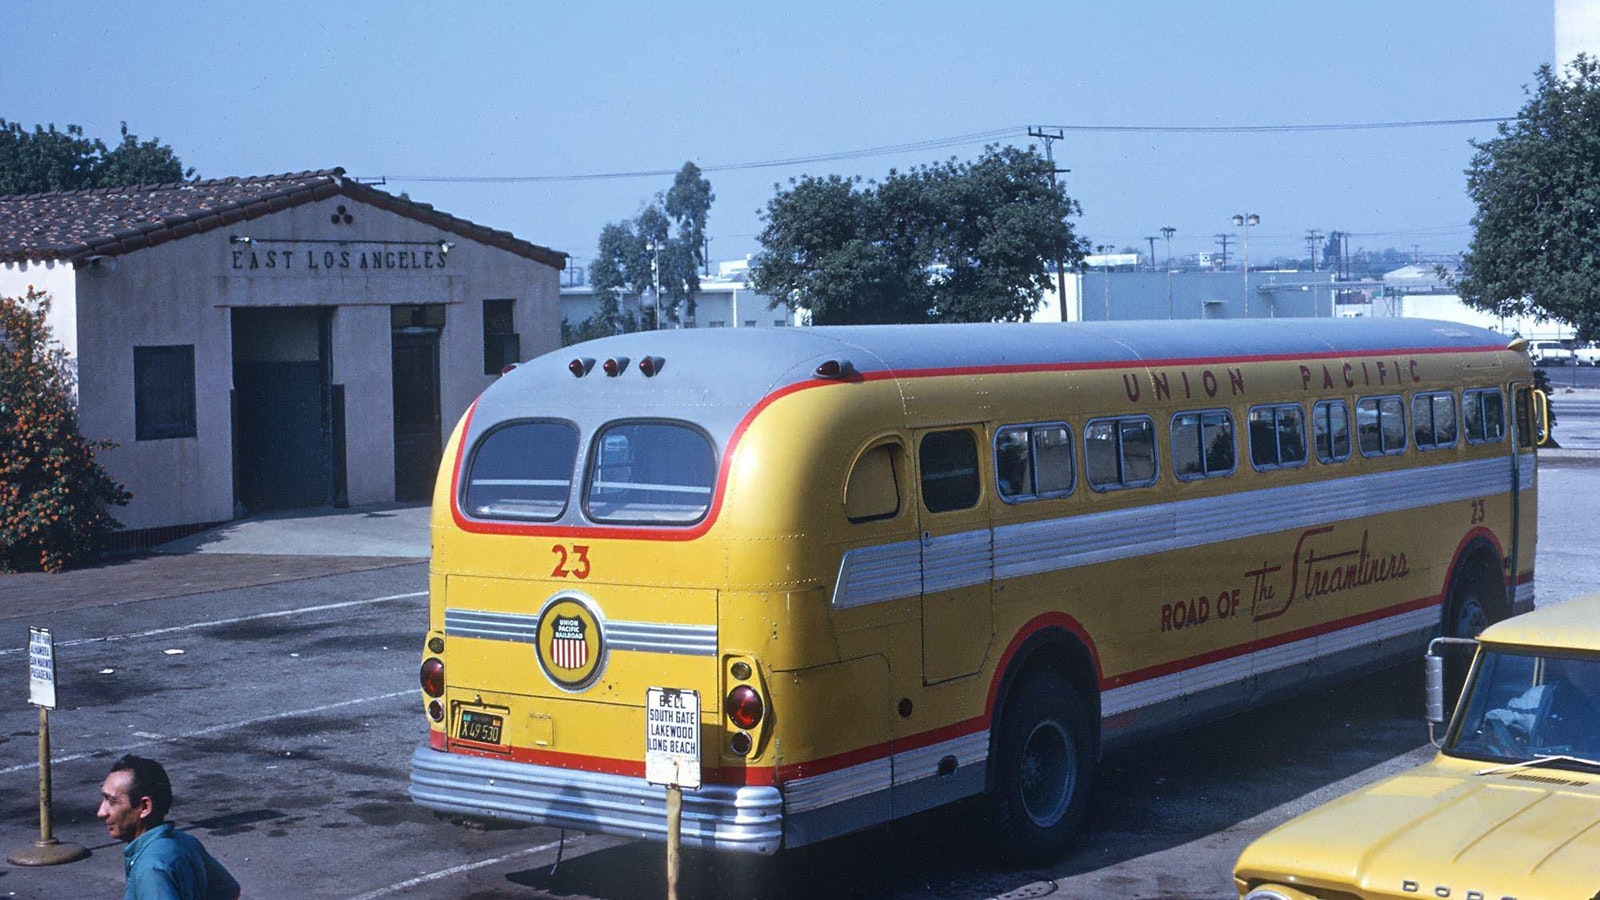 These 1949 GMC model Union Pacific buses were used for decades in and around Los Angeles. In this photo, the back end shows the UP logo, which would illuminate with the lights were on.